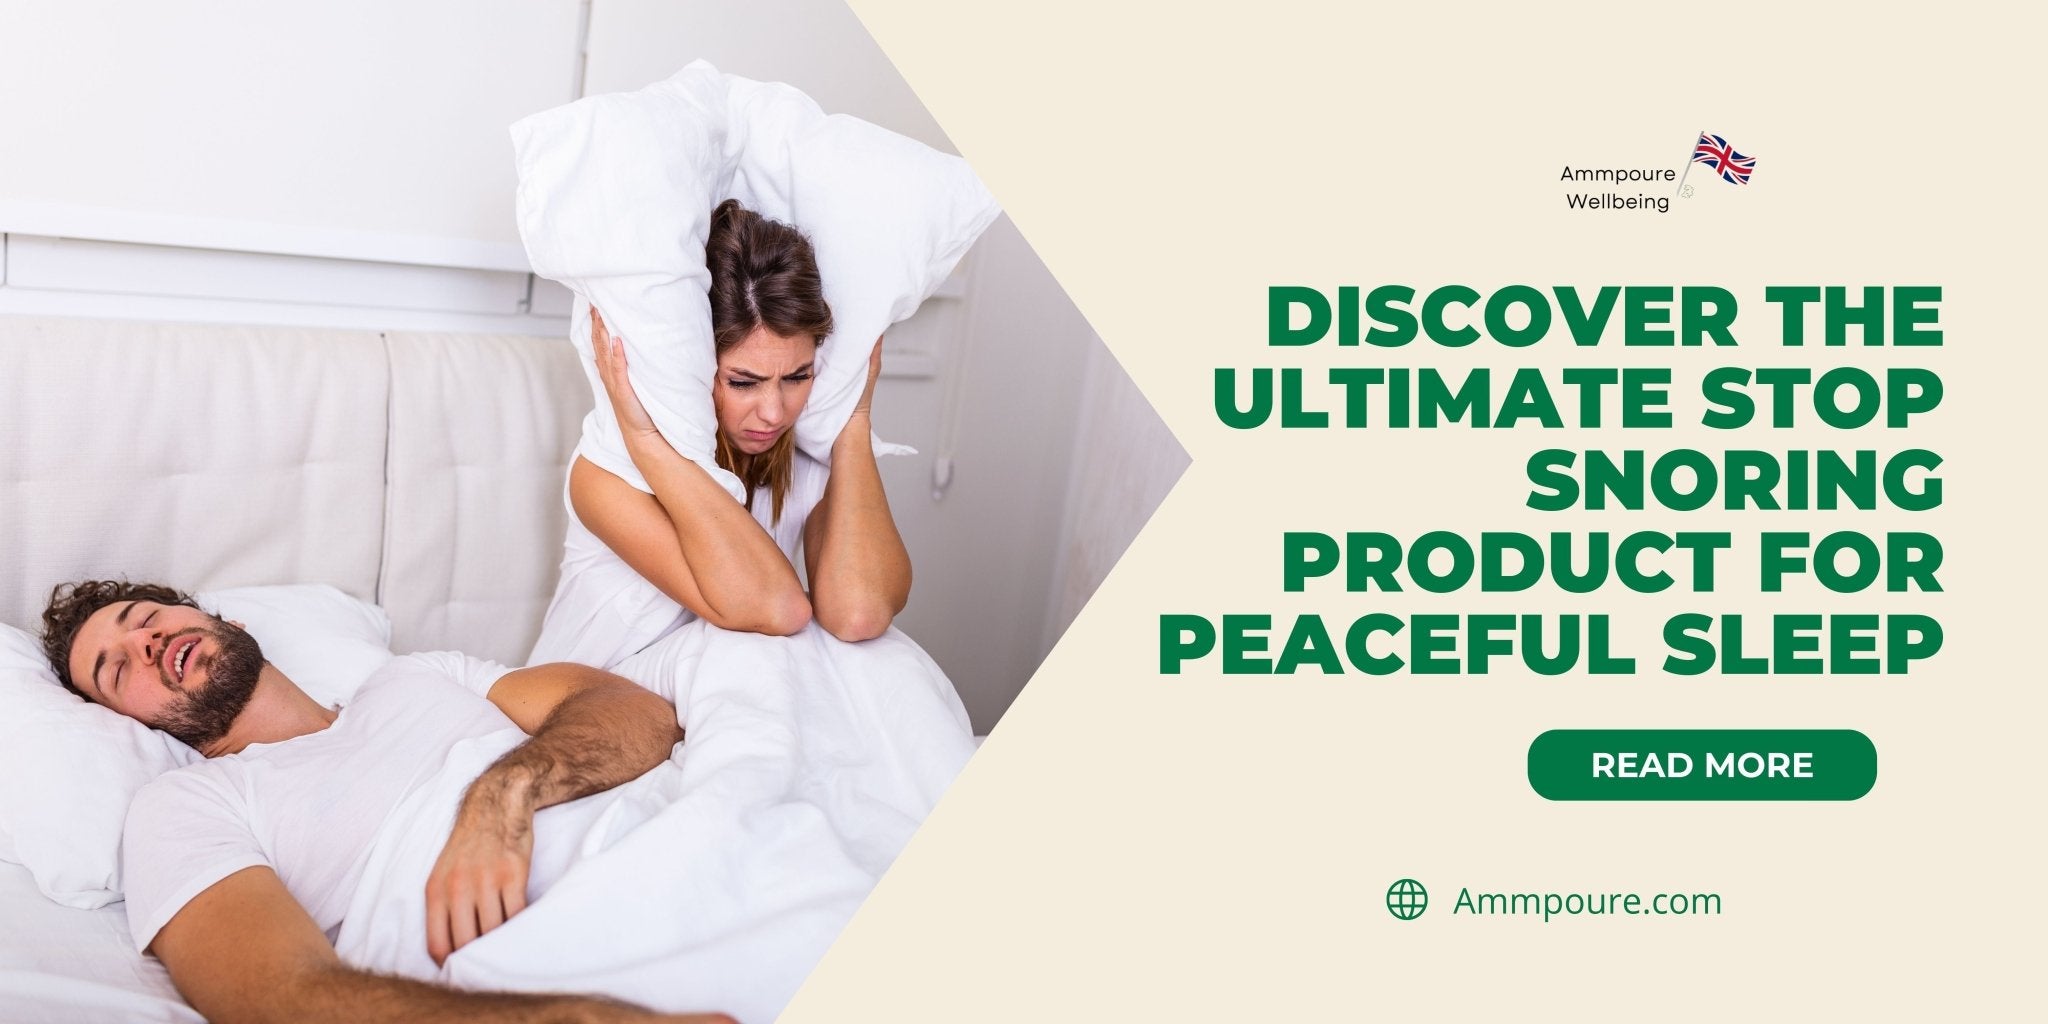 DISCOVER THE ULTIMATE STOP SNORING PRODUCT FOR PEACEFUL SLEEP - Ammpoure Wellbeing